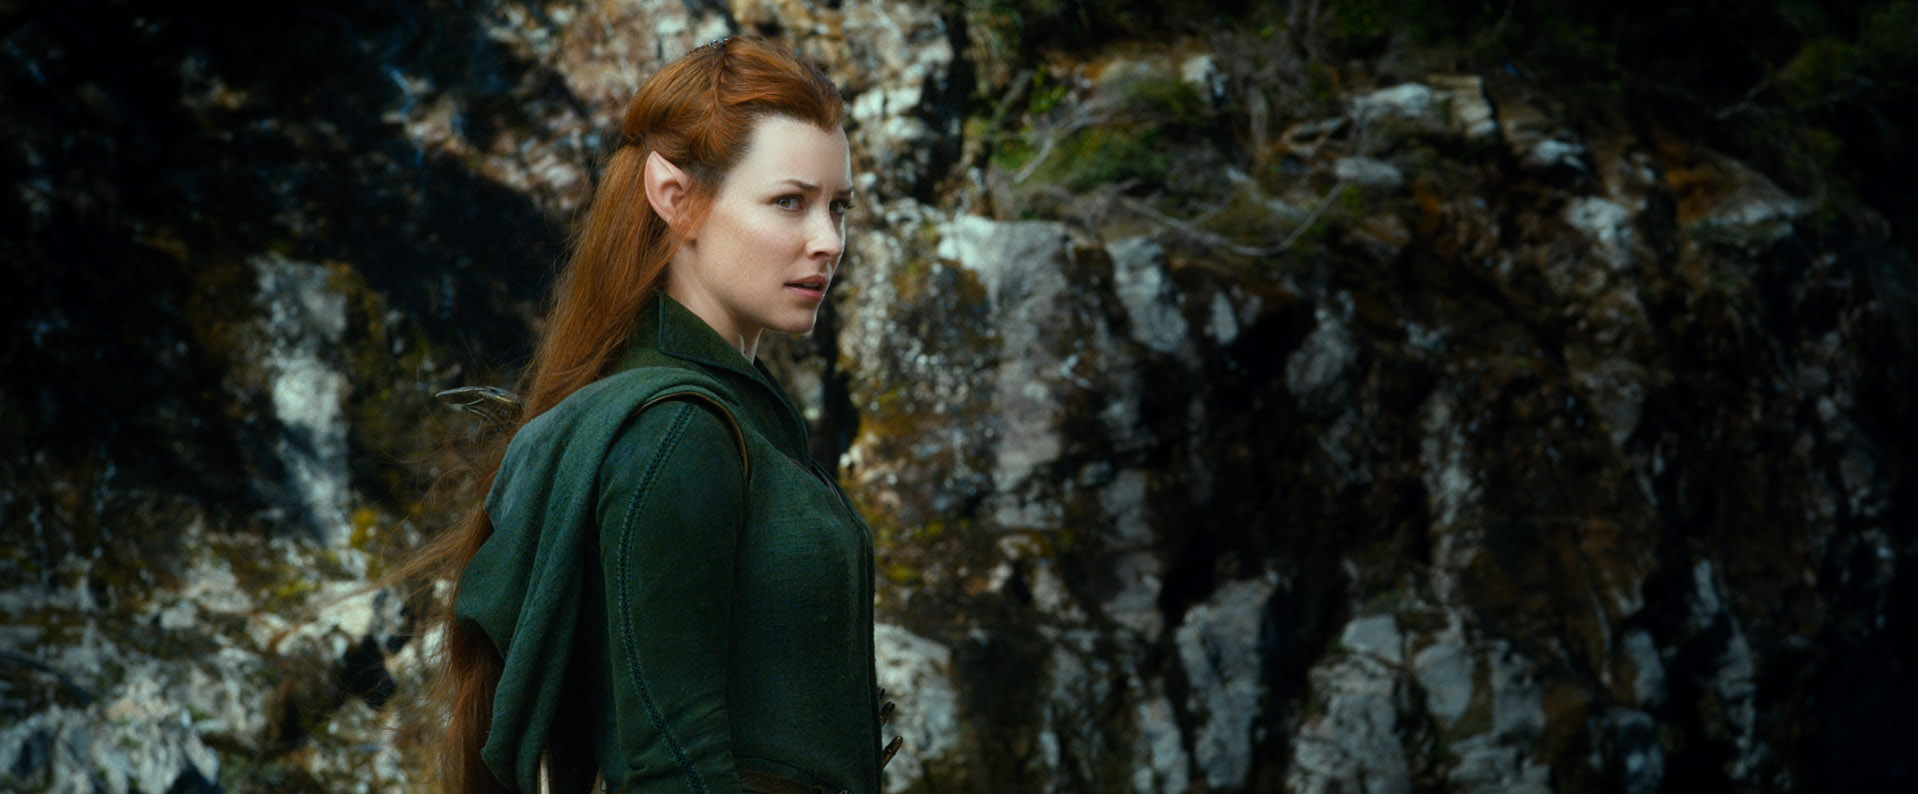 Evangeline-Lilly-in-The-Hobbit-The-Desolation-of-Smaug